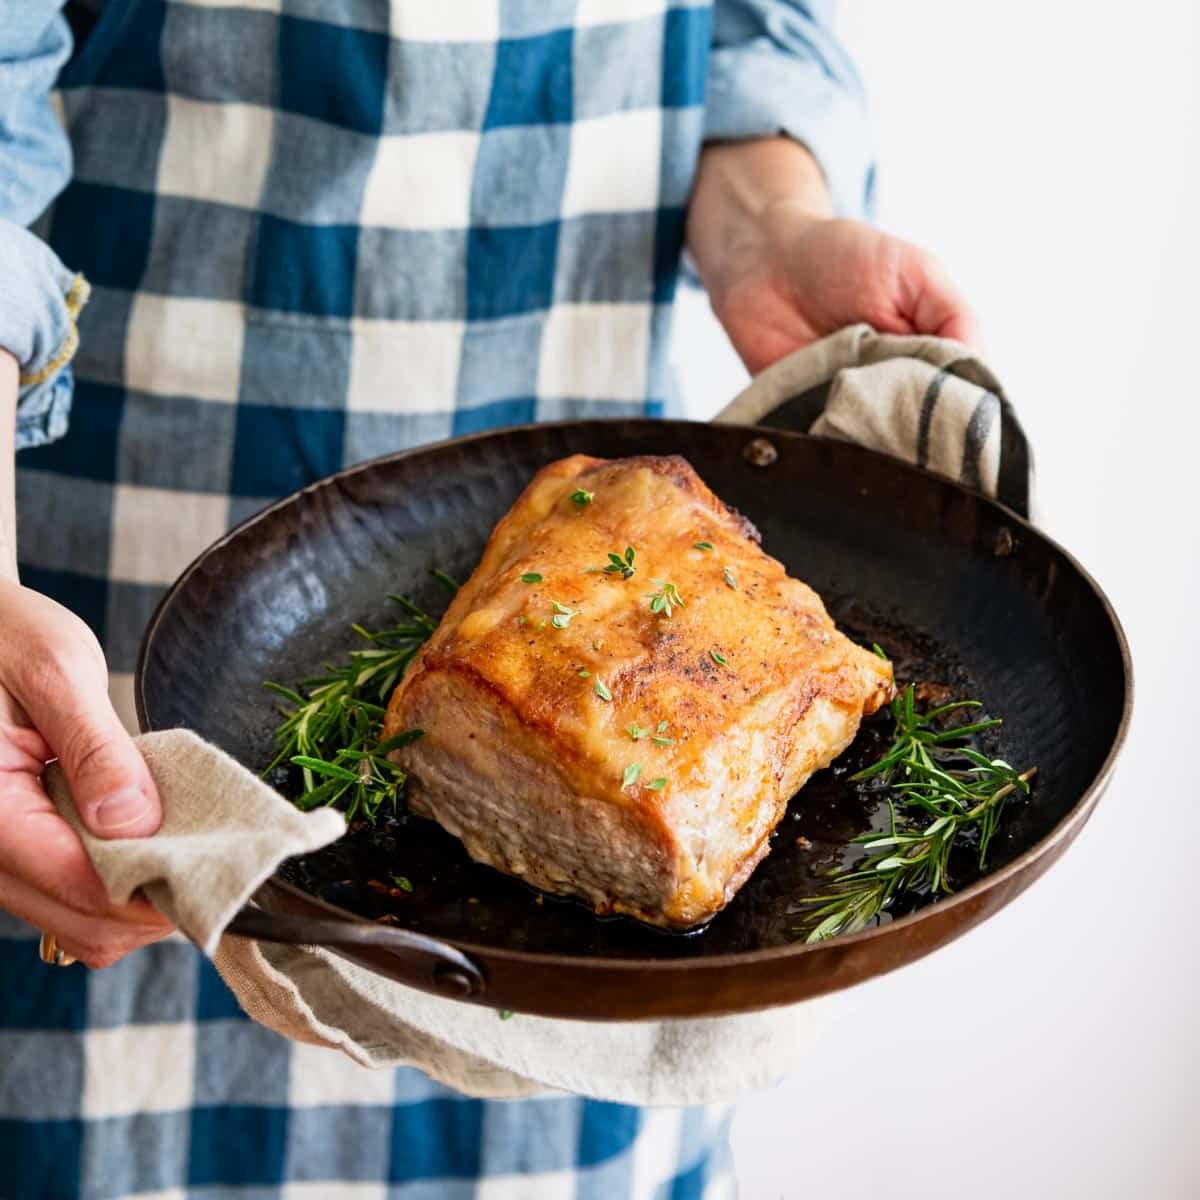 Square side shot of hands holding an oven roasted pork loin in a cast iron skillet.